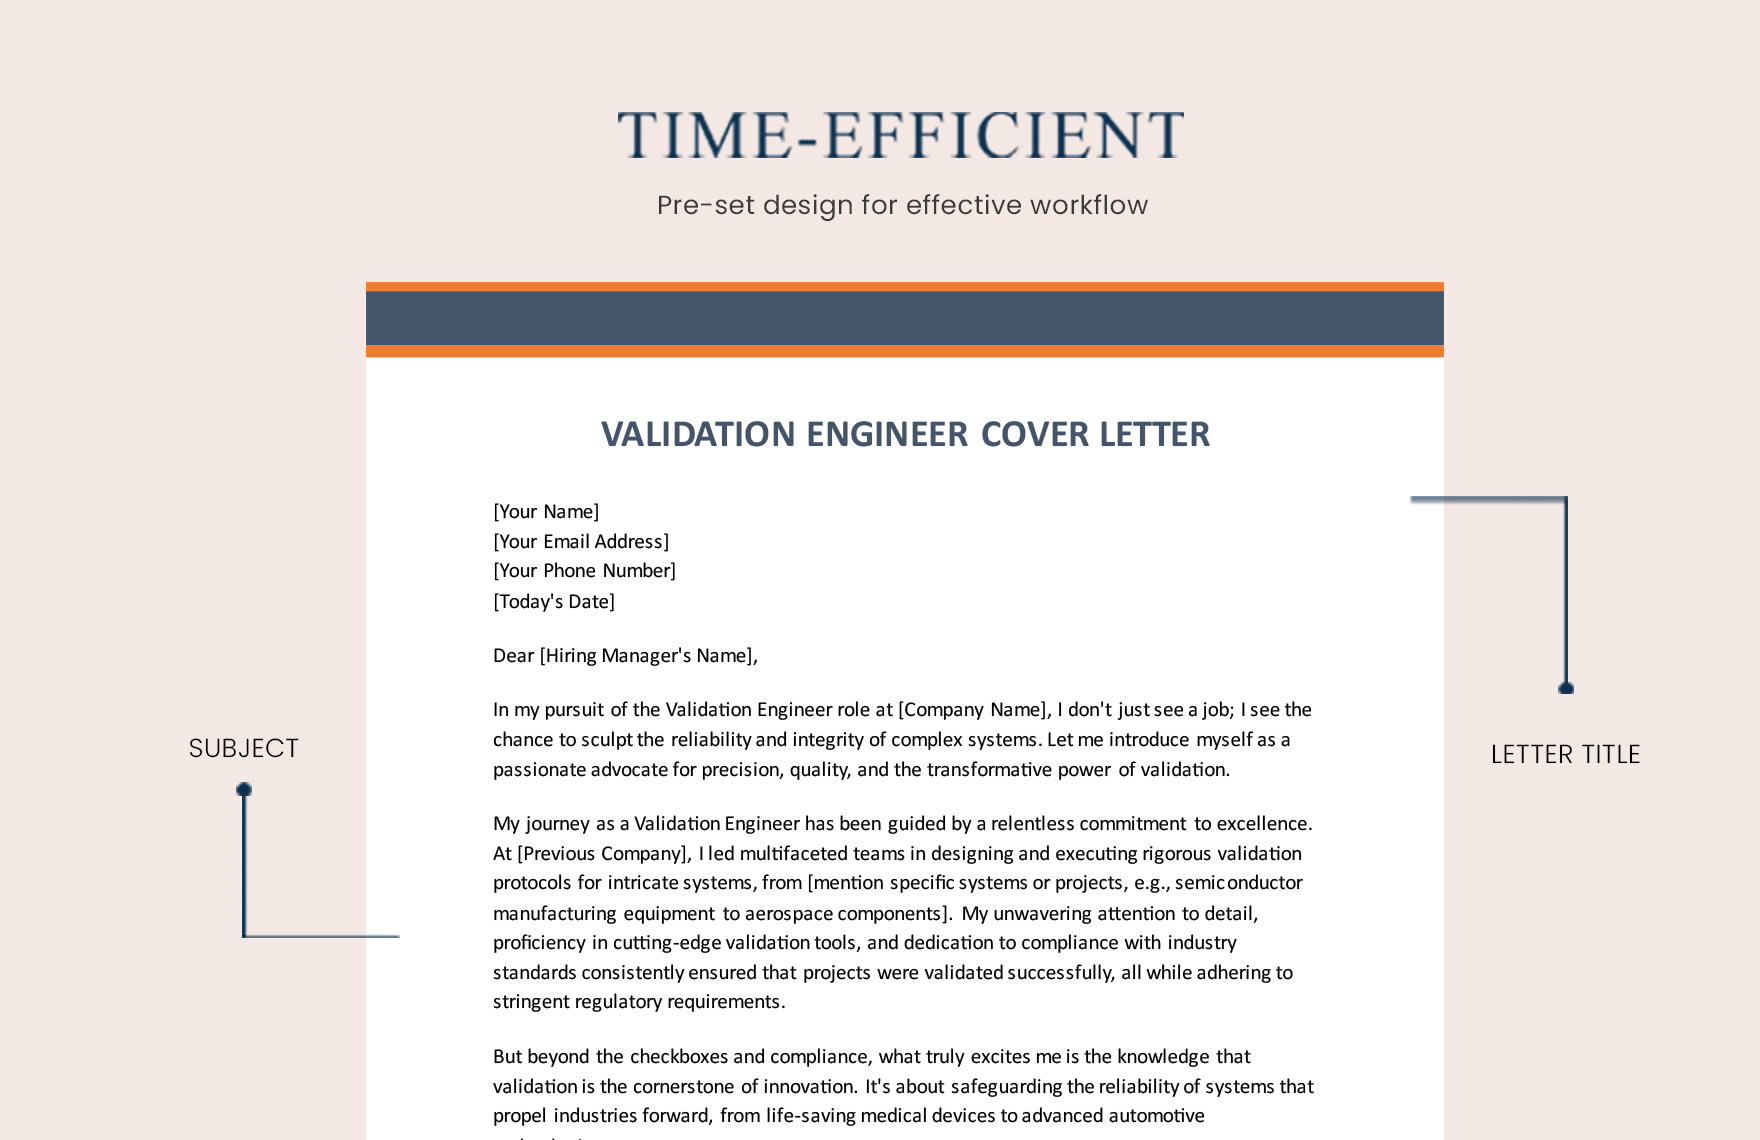 Validation Engineer Cover Letter